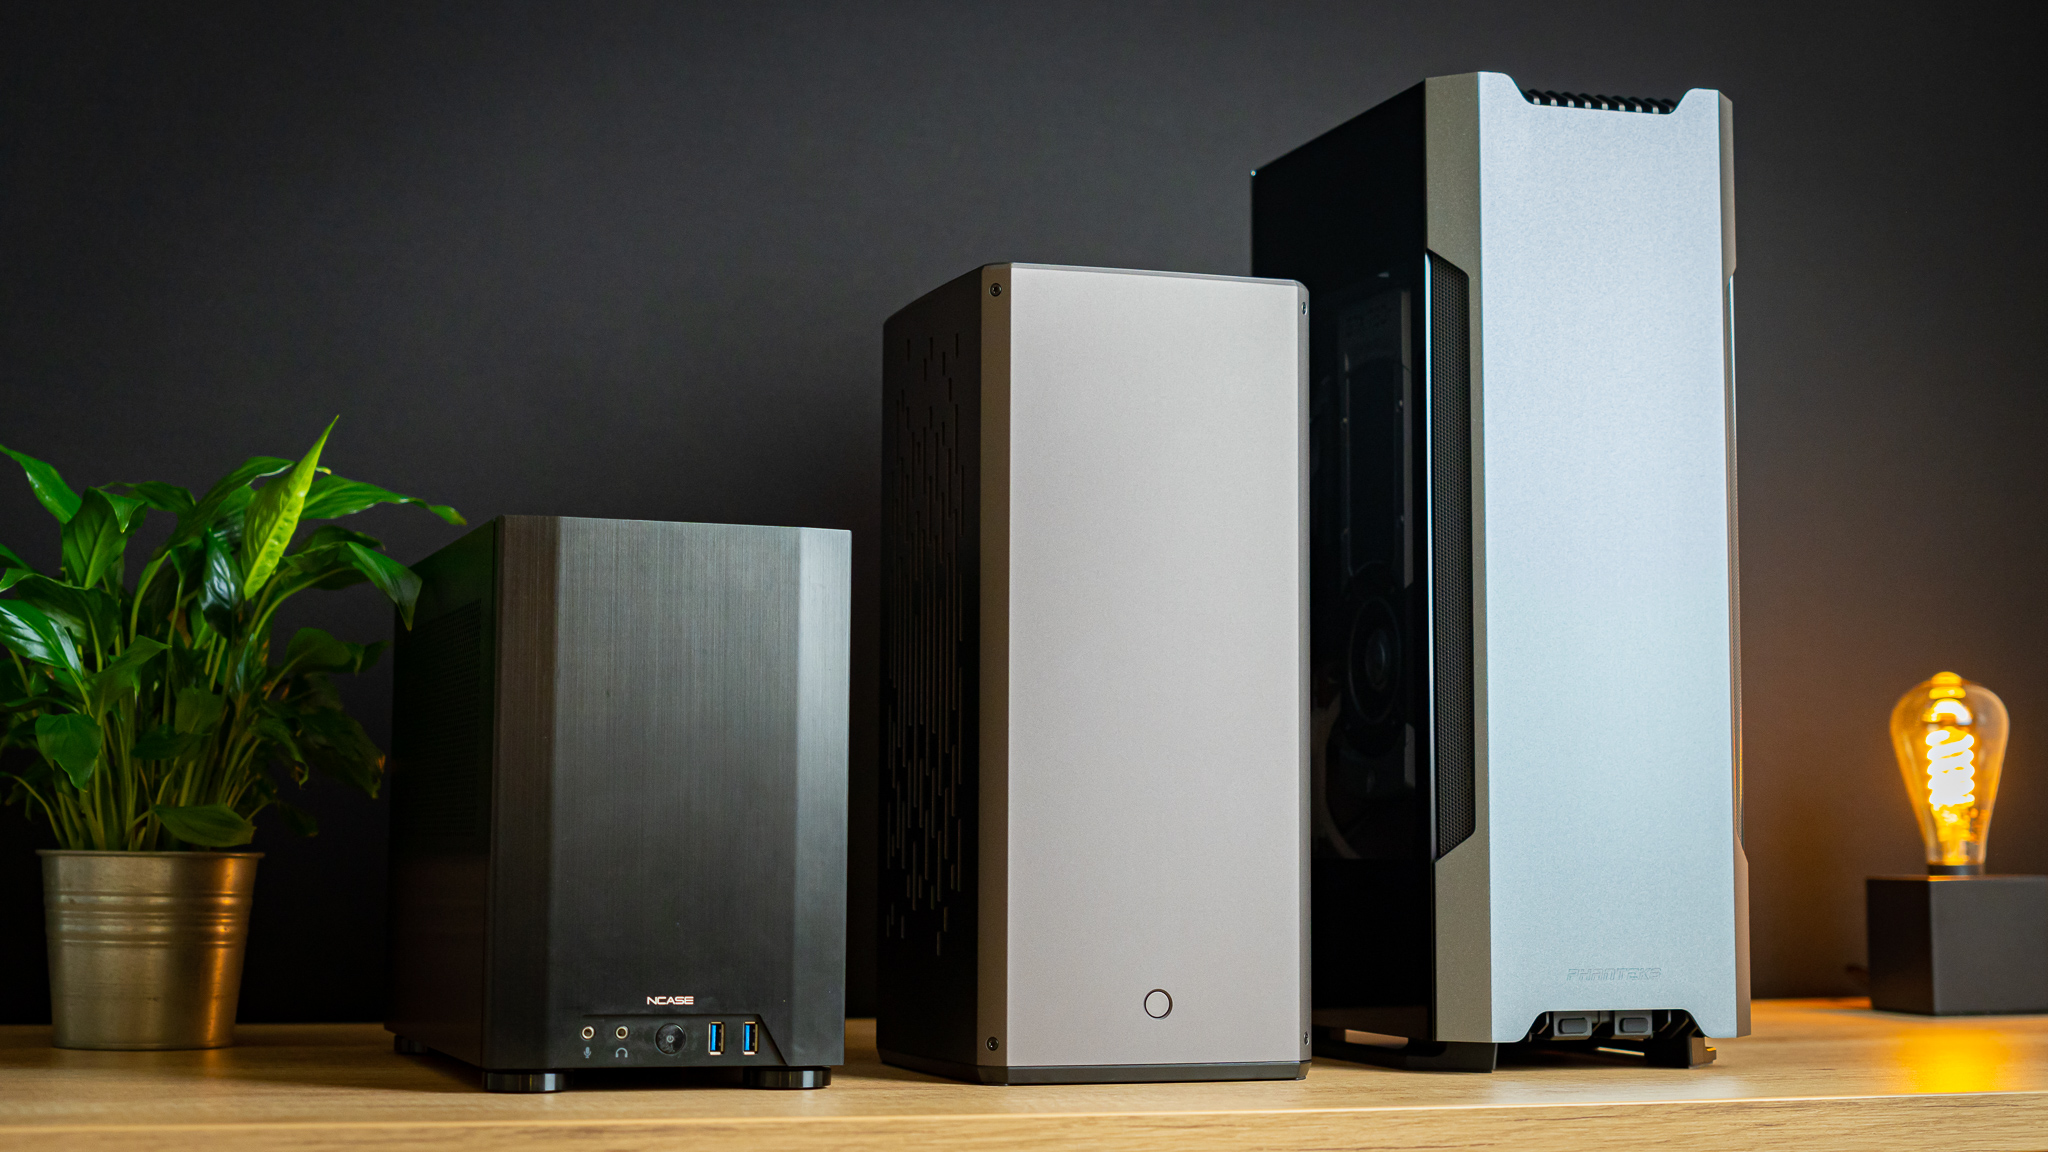 Best Mini-ITX Cases 2022: Our Picks for Space-Saving PC Builds